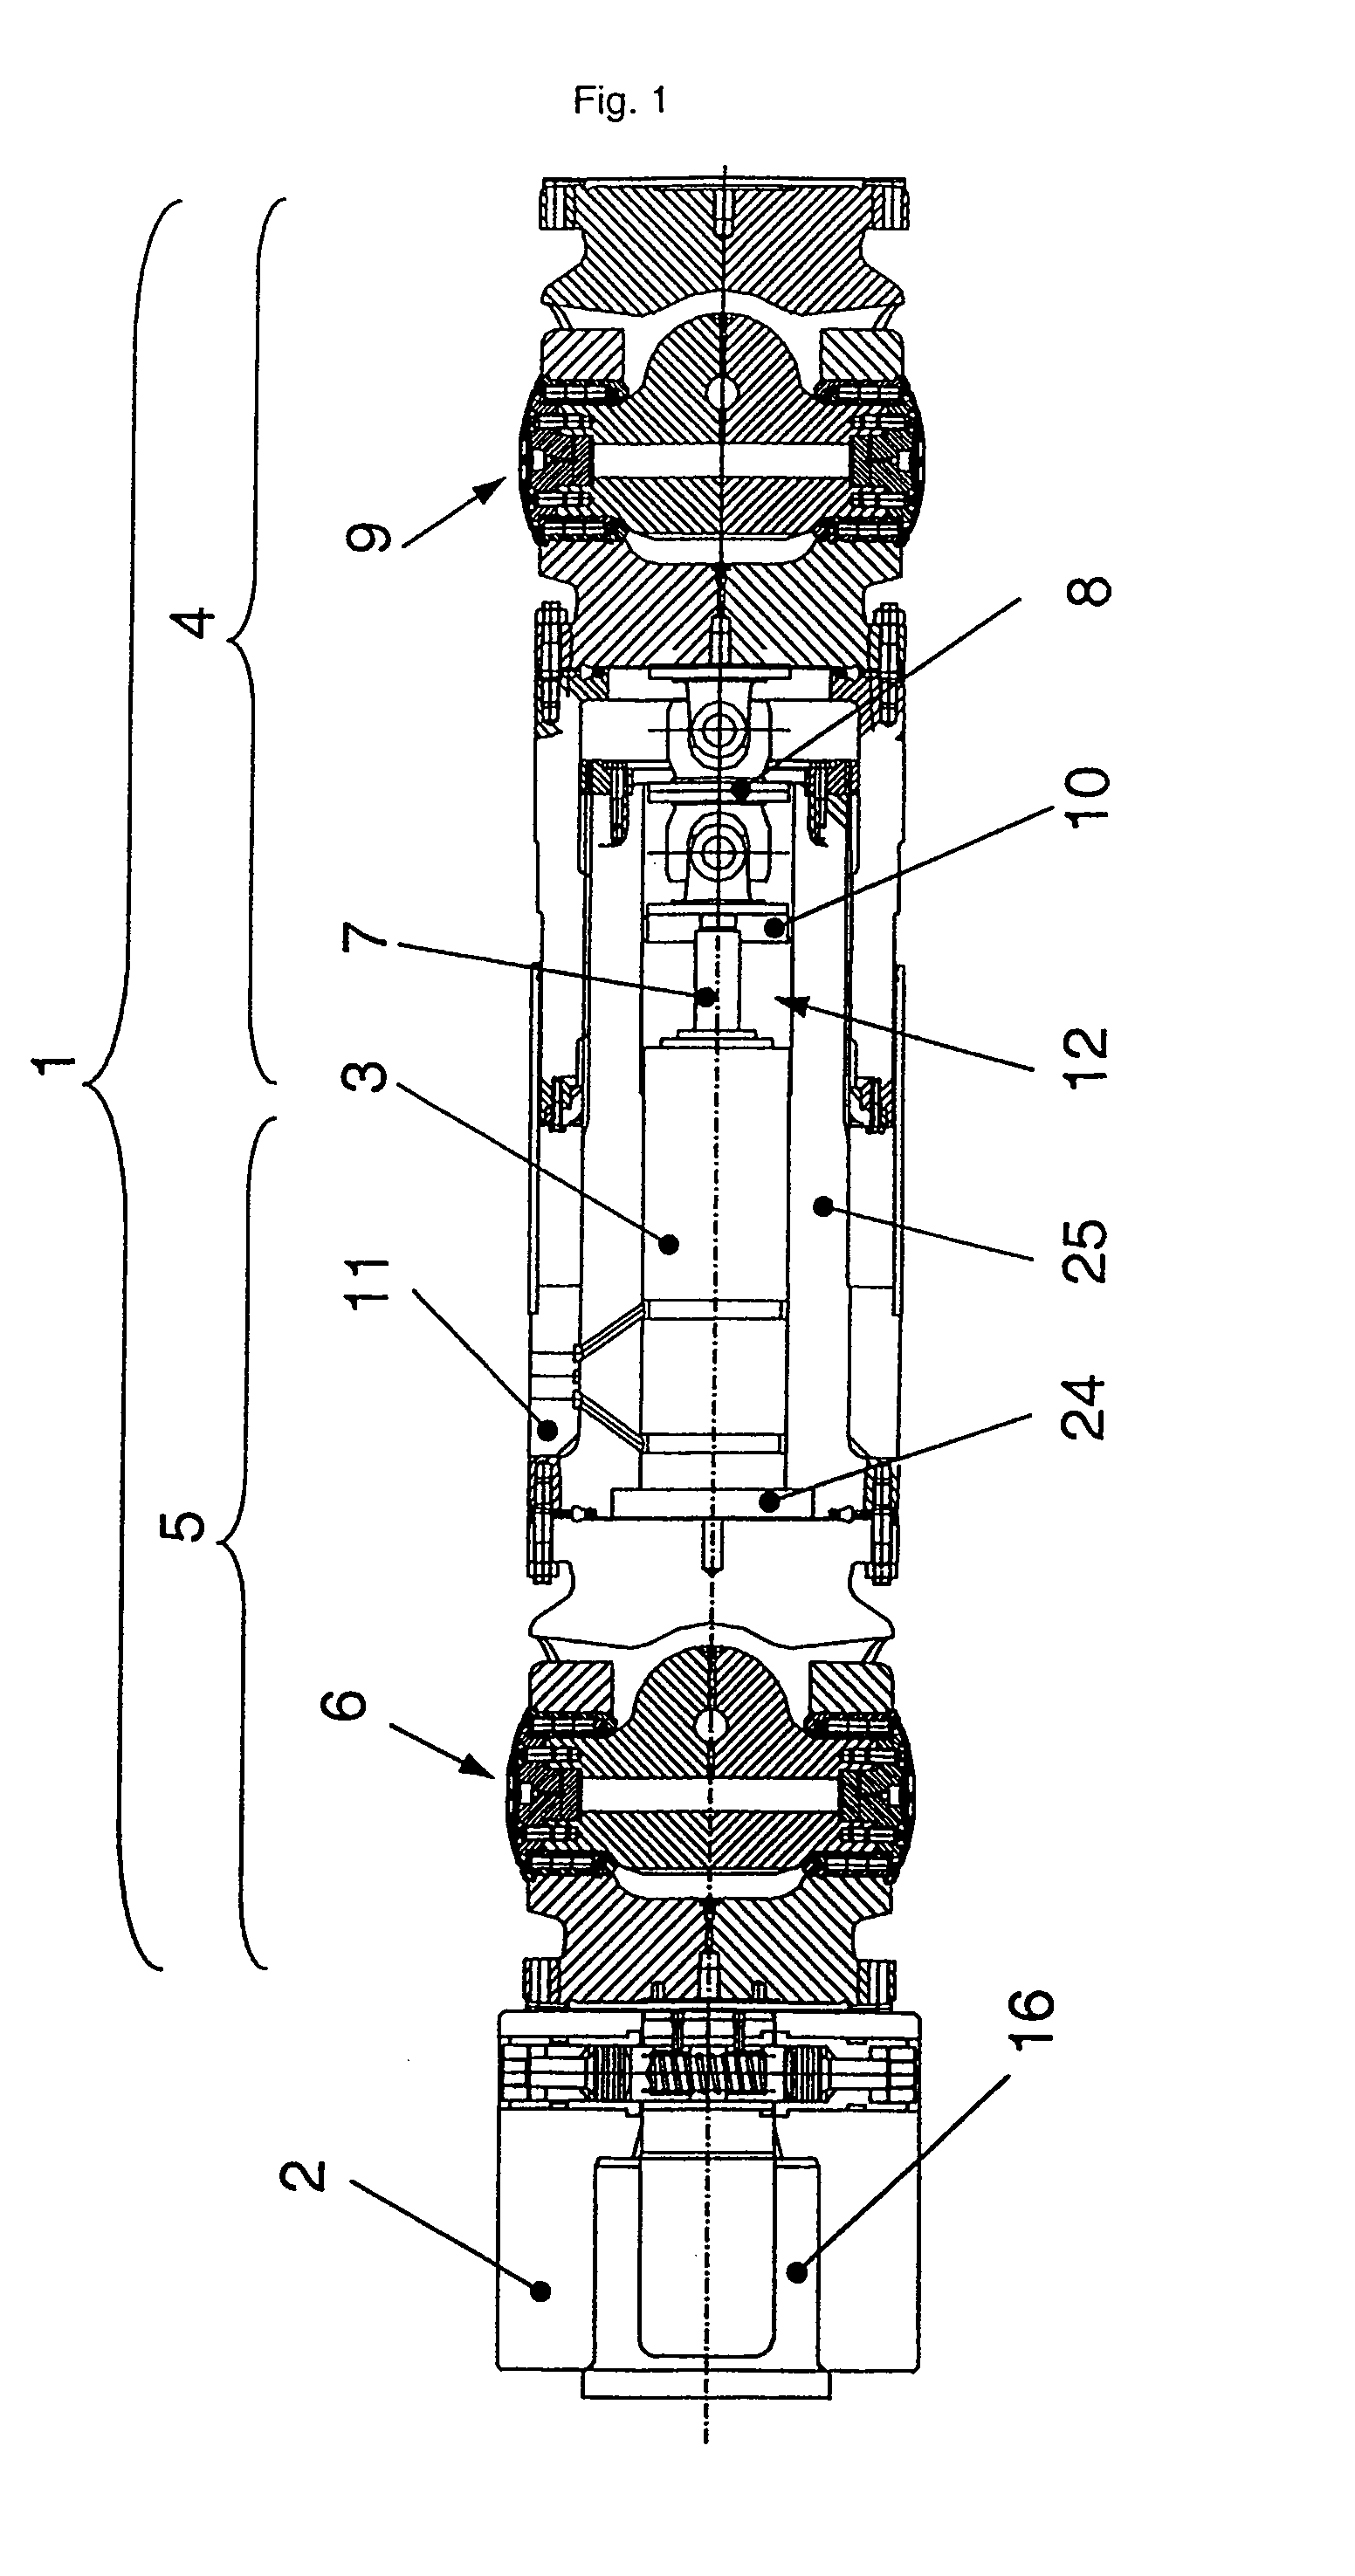 Roll stand provided with a displacement device